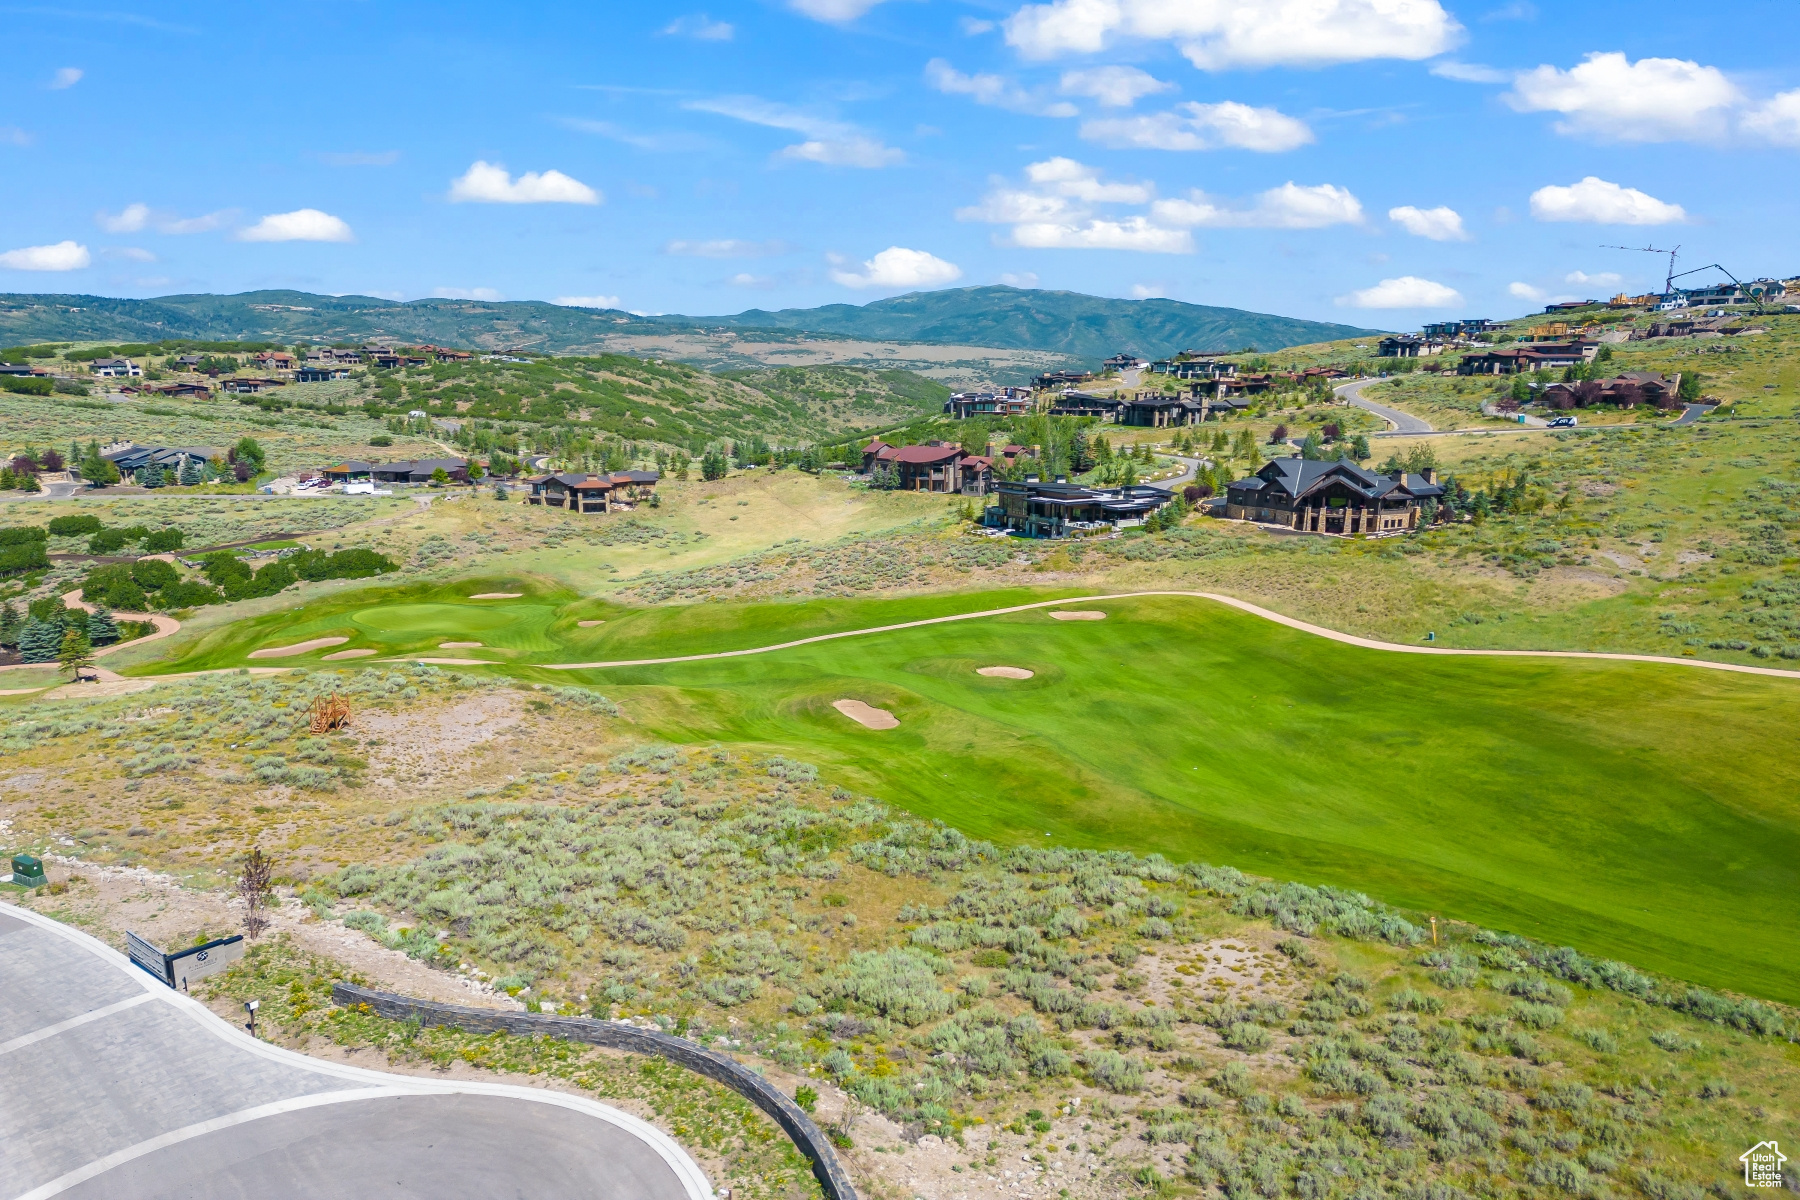 3172 WAPITI CANYON #56, Park City, Utah 84098, 4 Bedrooms Bedrooms, 19 Rooms Rooms,4 BathroomsBathrooms,Residential,For sale,WAPITI CANYON,1990475